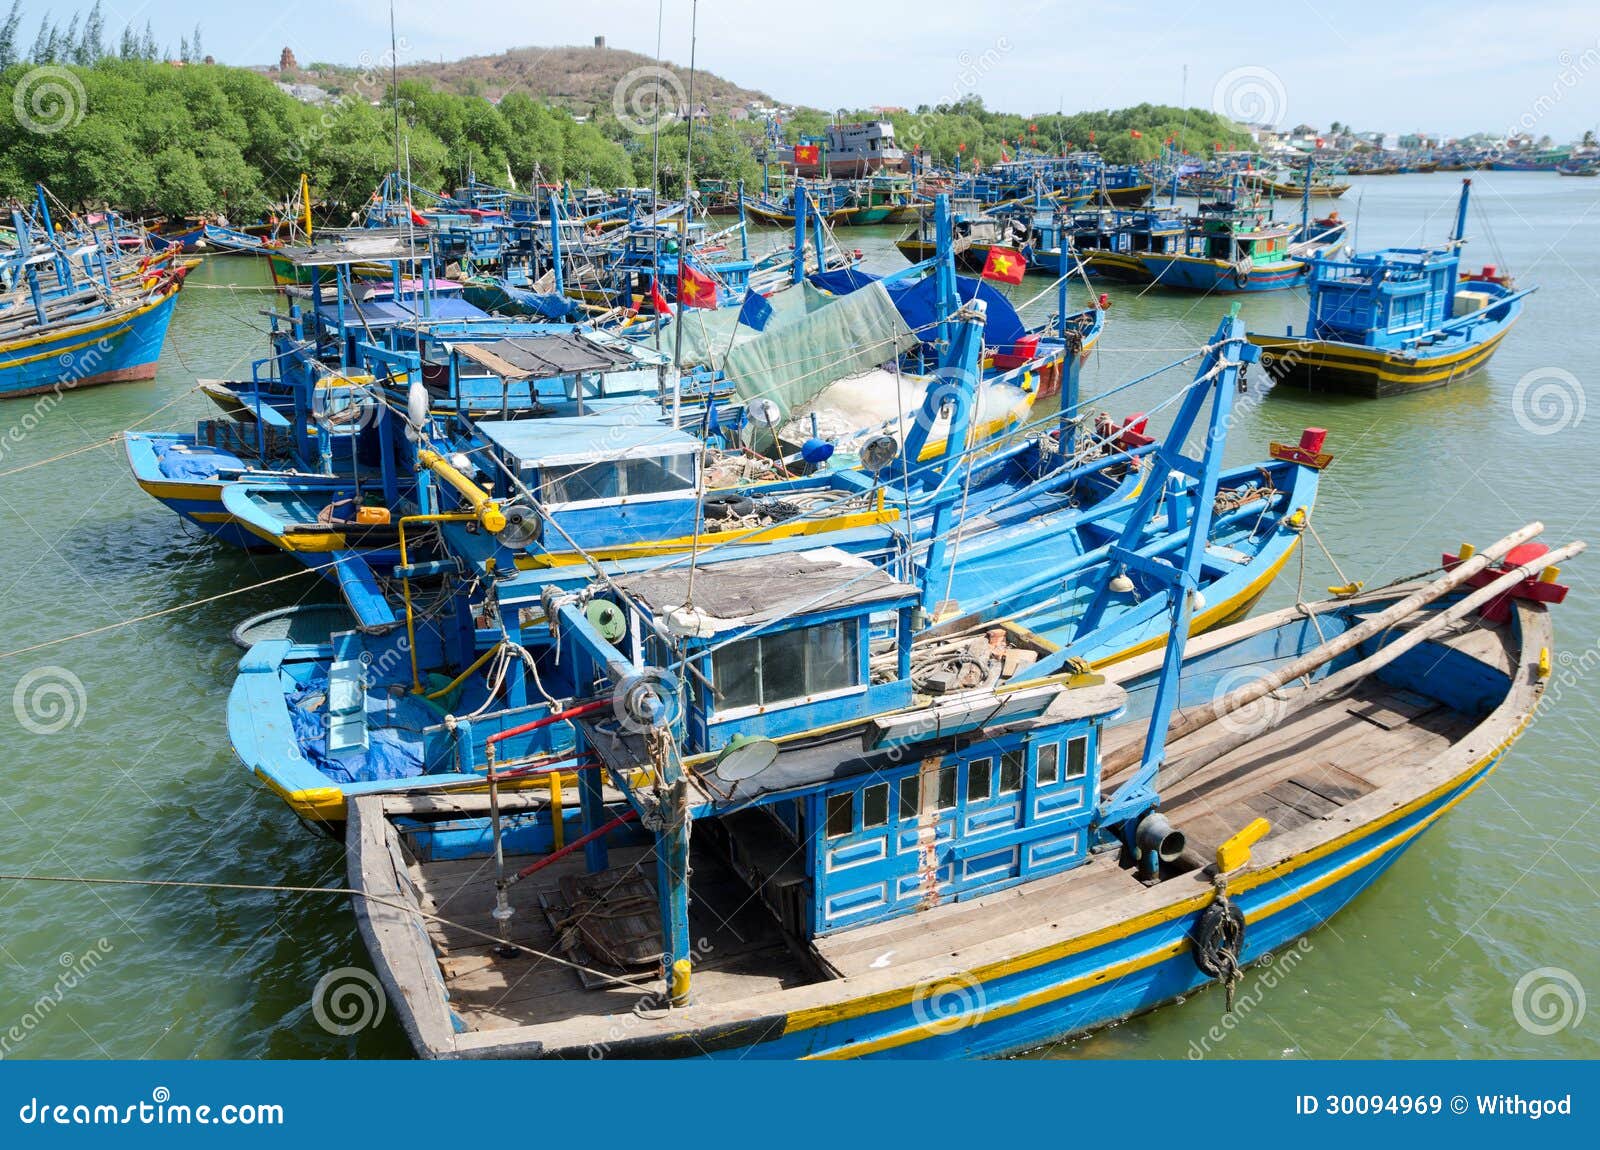 Fishing Boats In Vietnam Royalty Free Stock Images - Image: 30094969